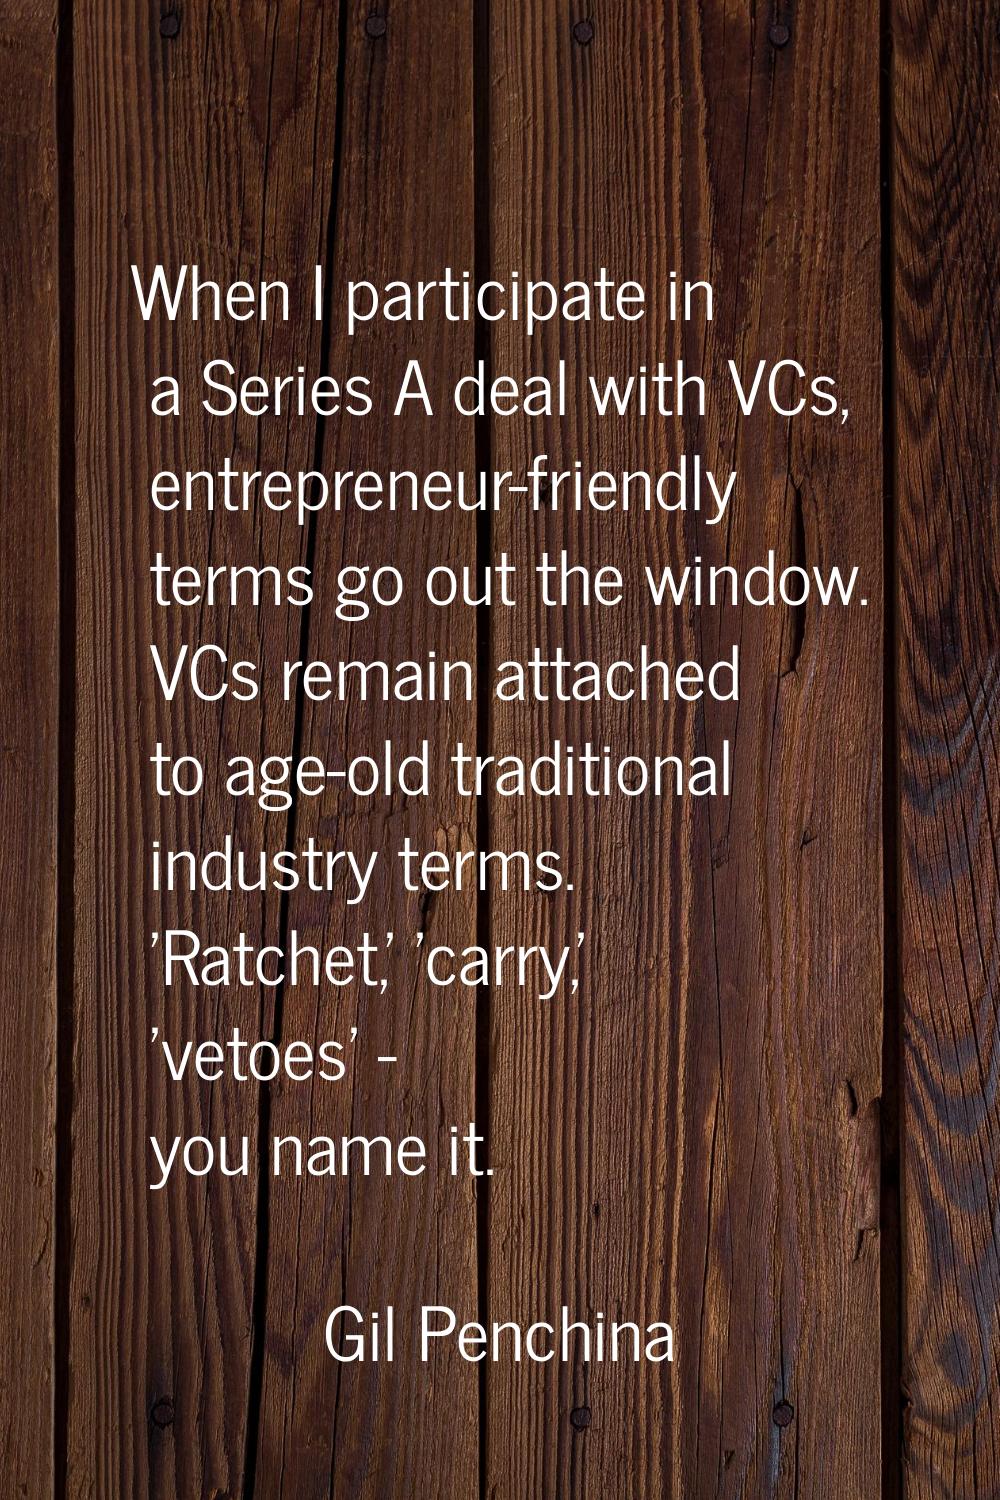 When I participate in a Series A deal with VCs, entrepreneur-friendly terms go out the window. VCs 